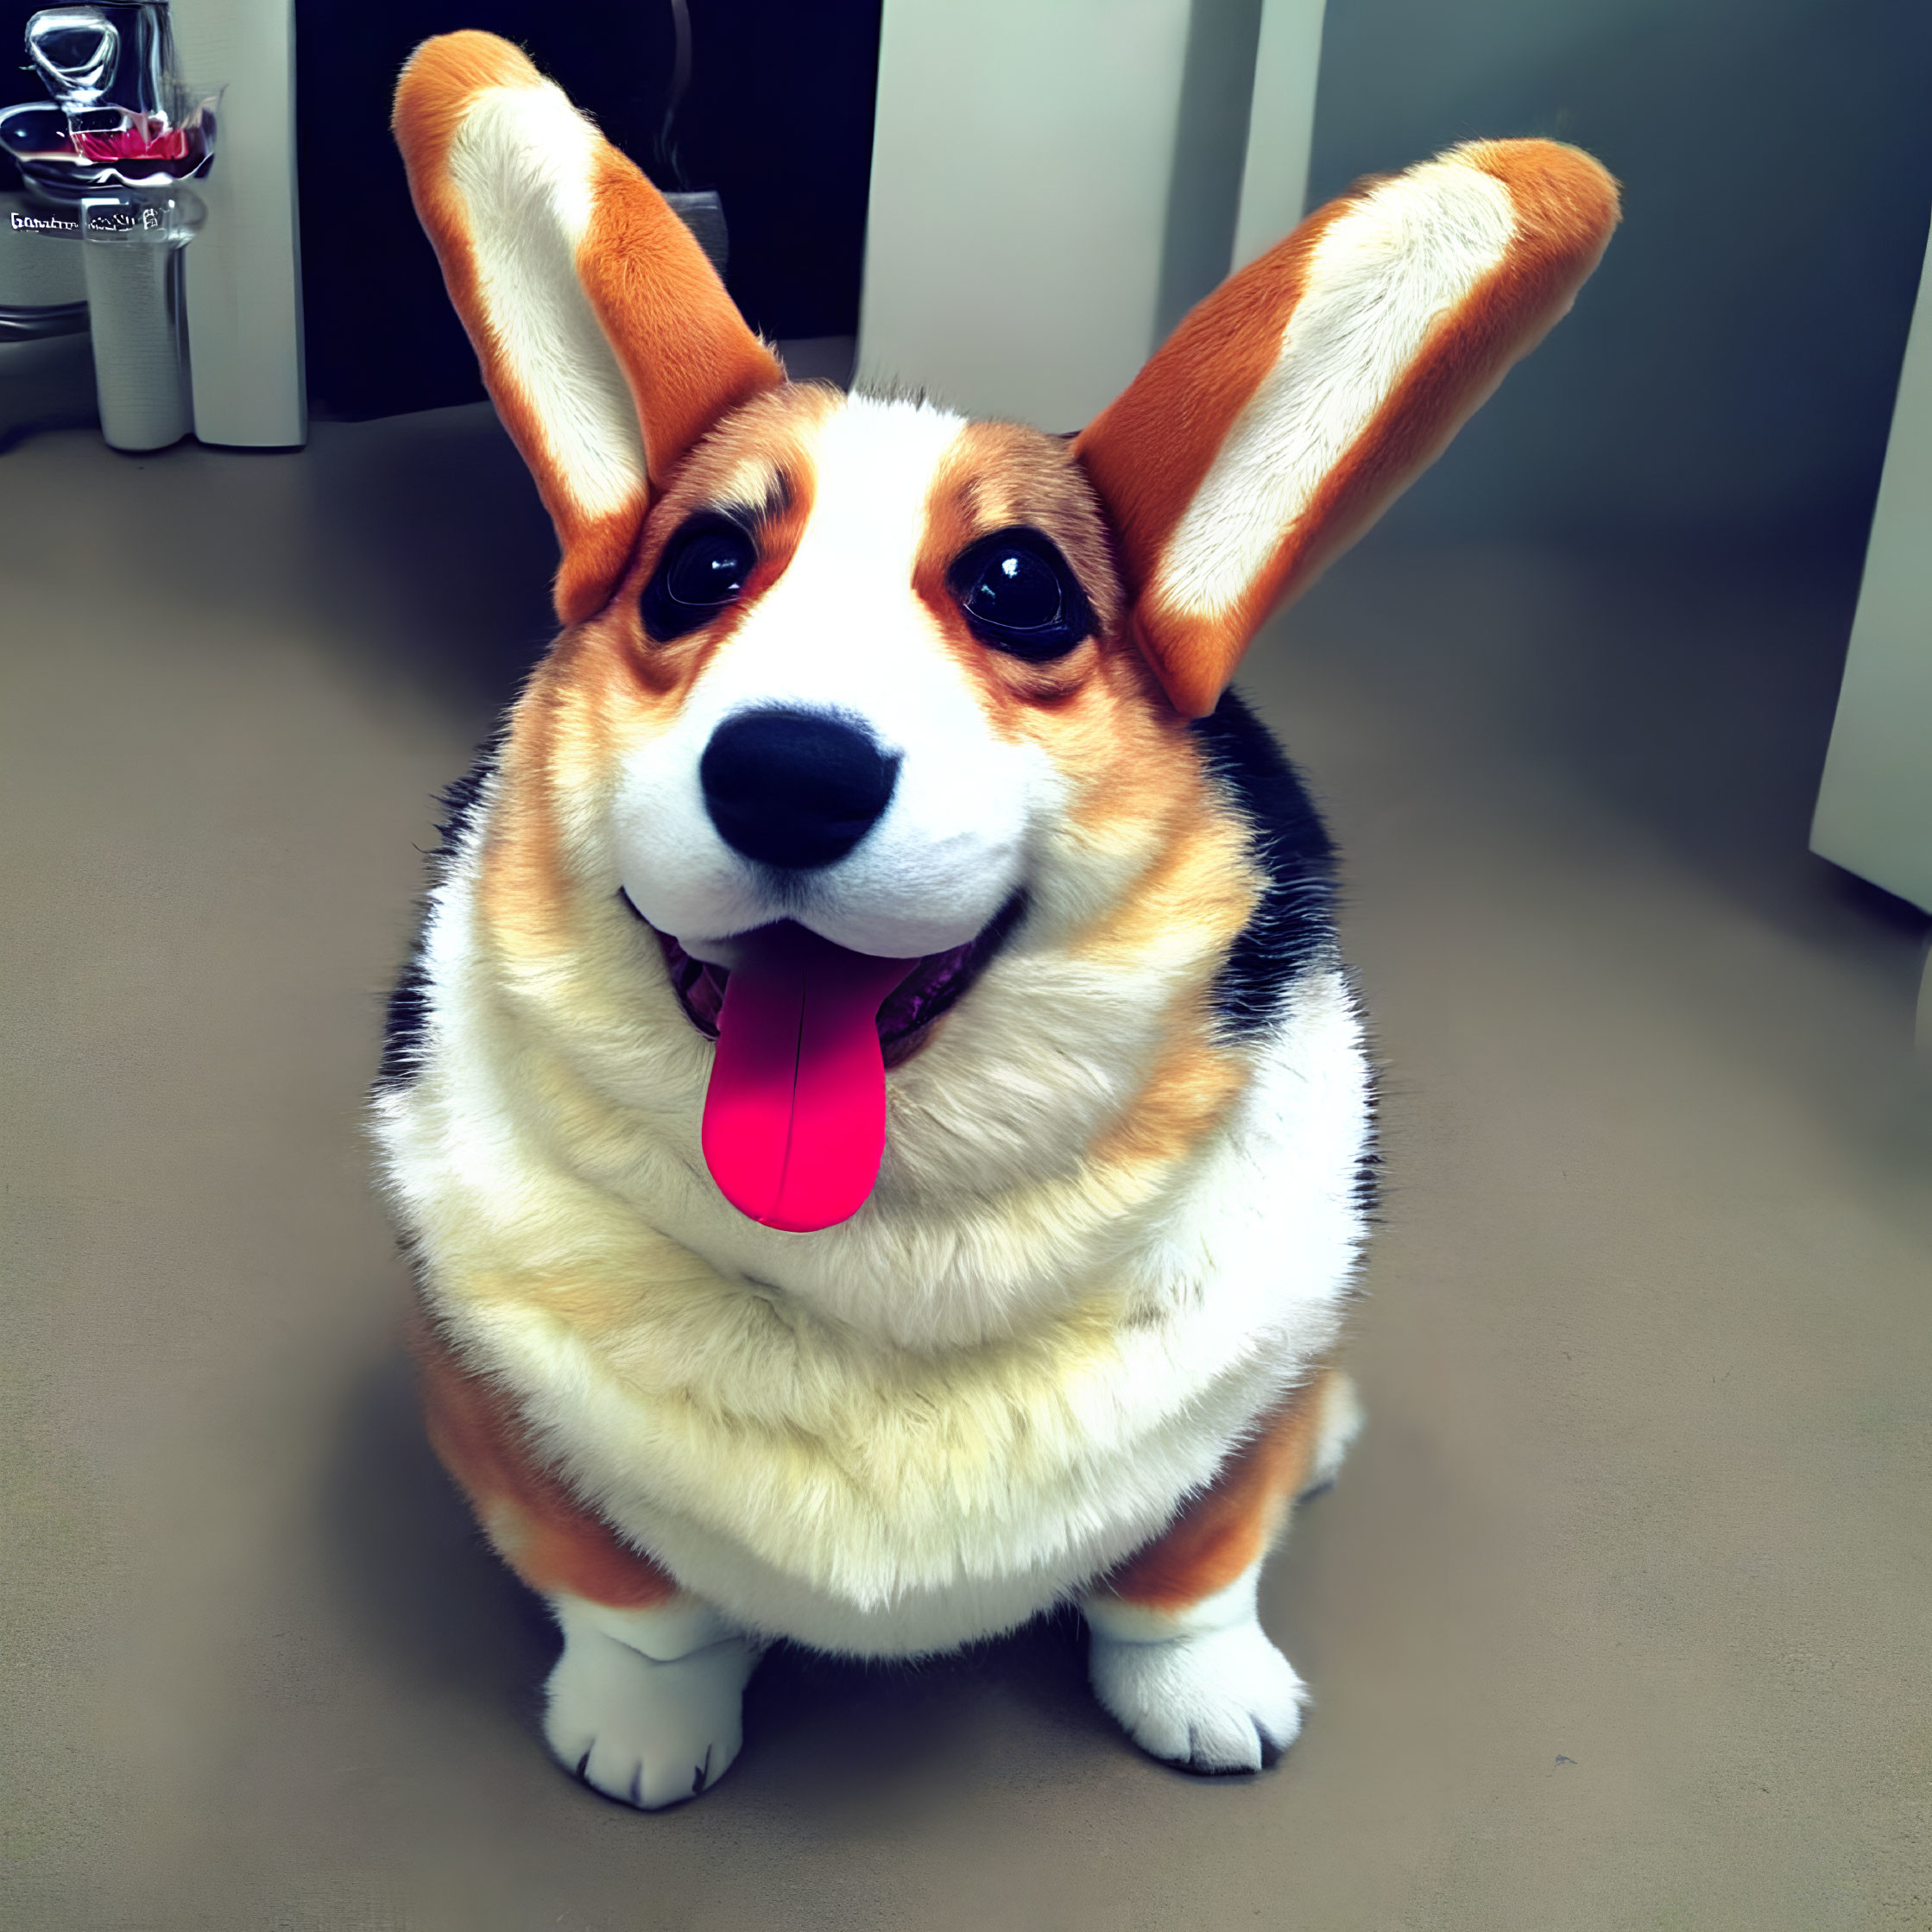 Smiling corgi with big ears and tongue out on floor